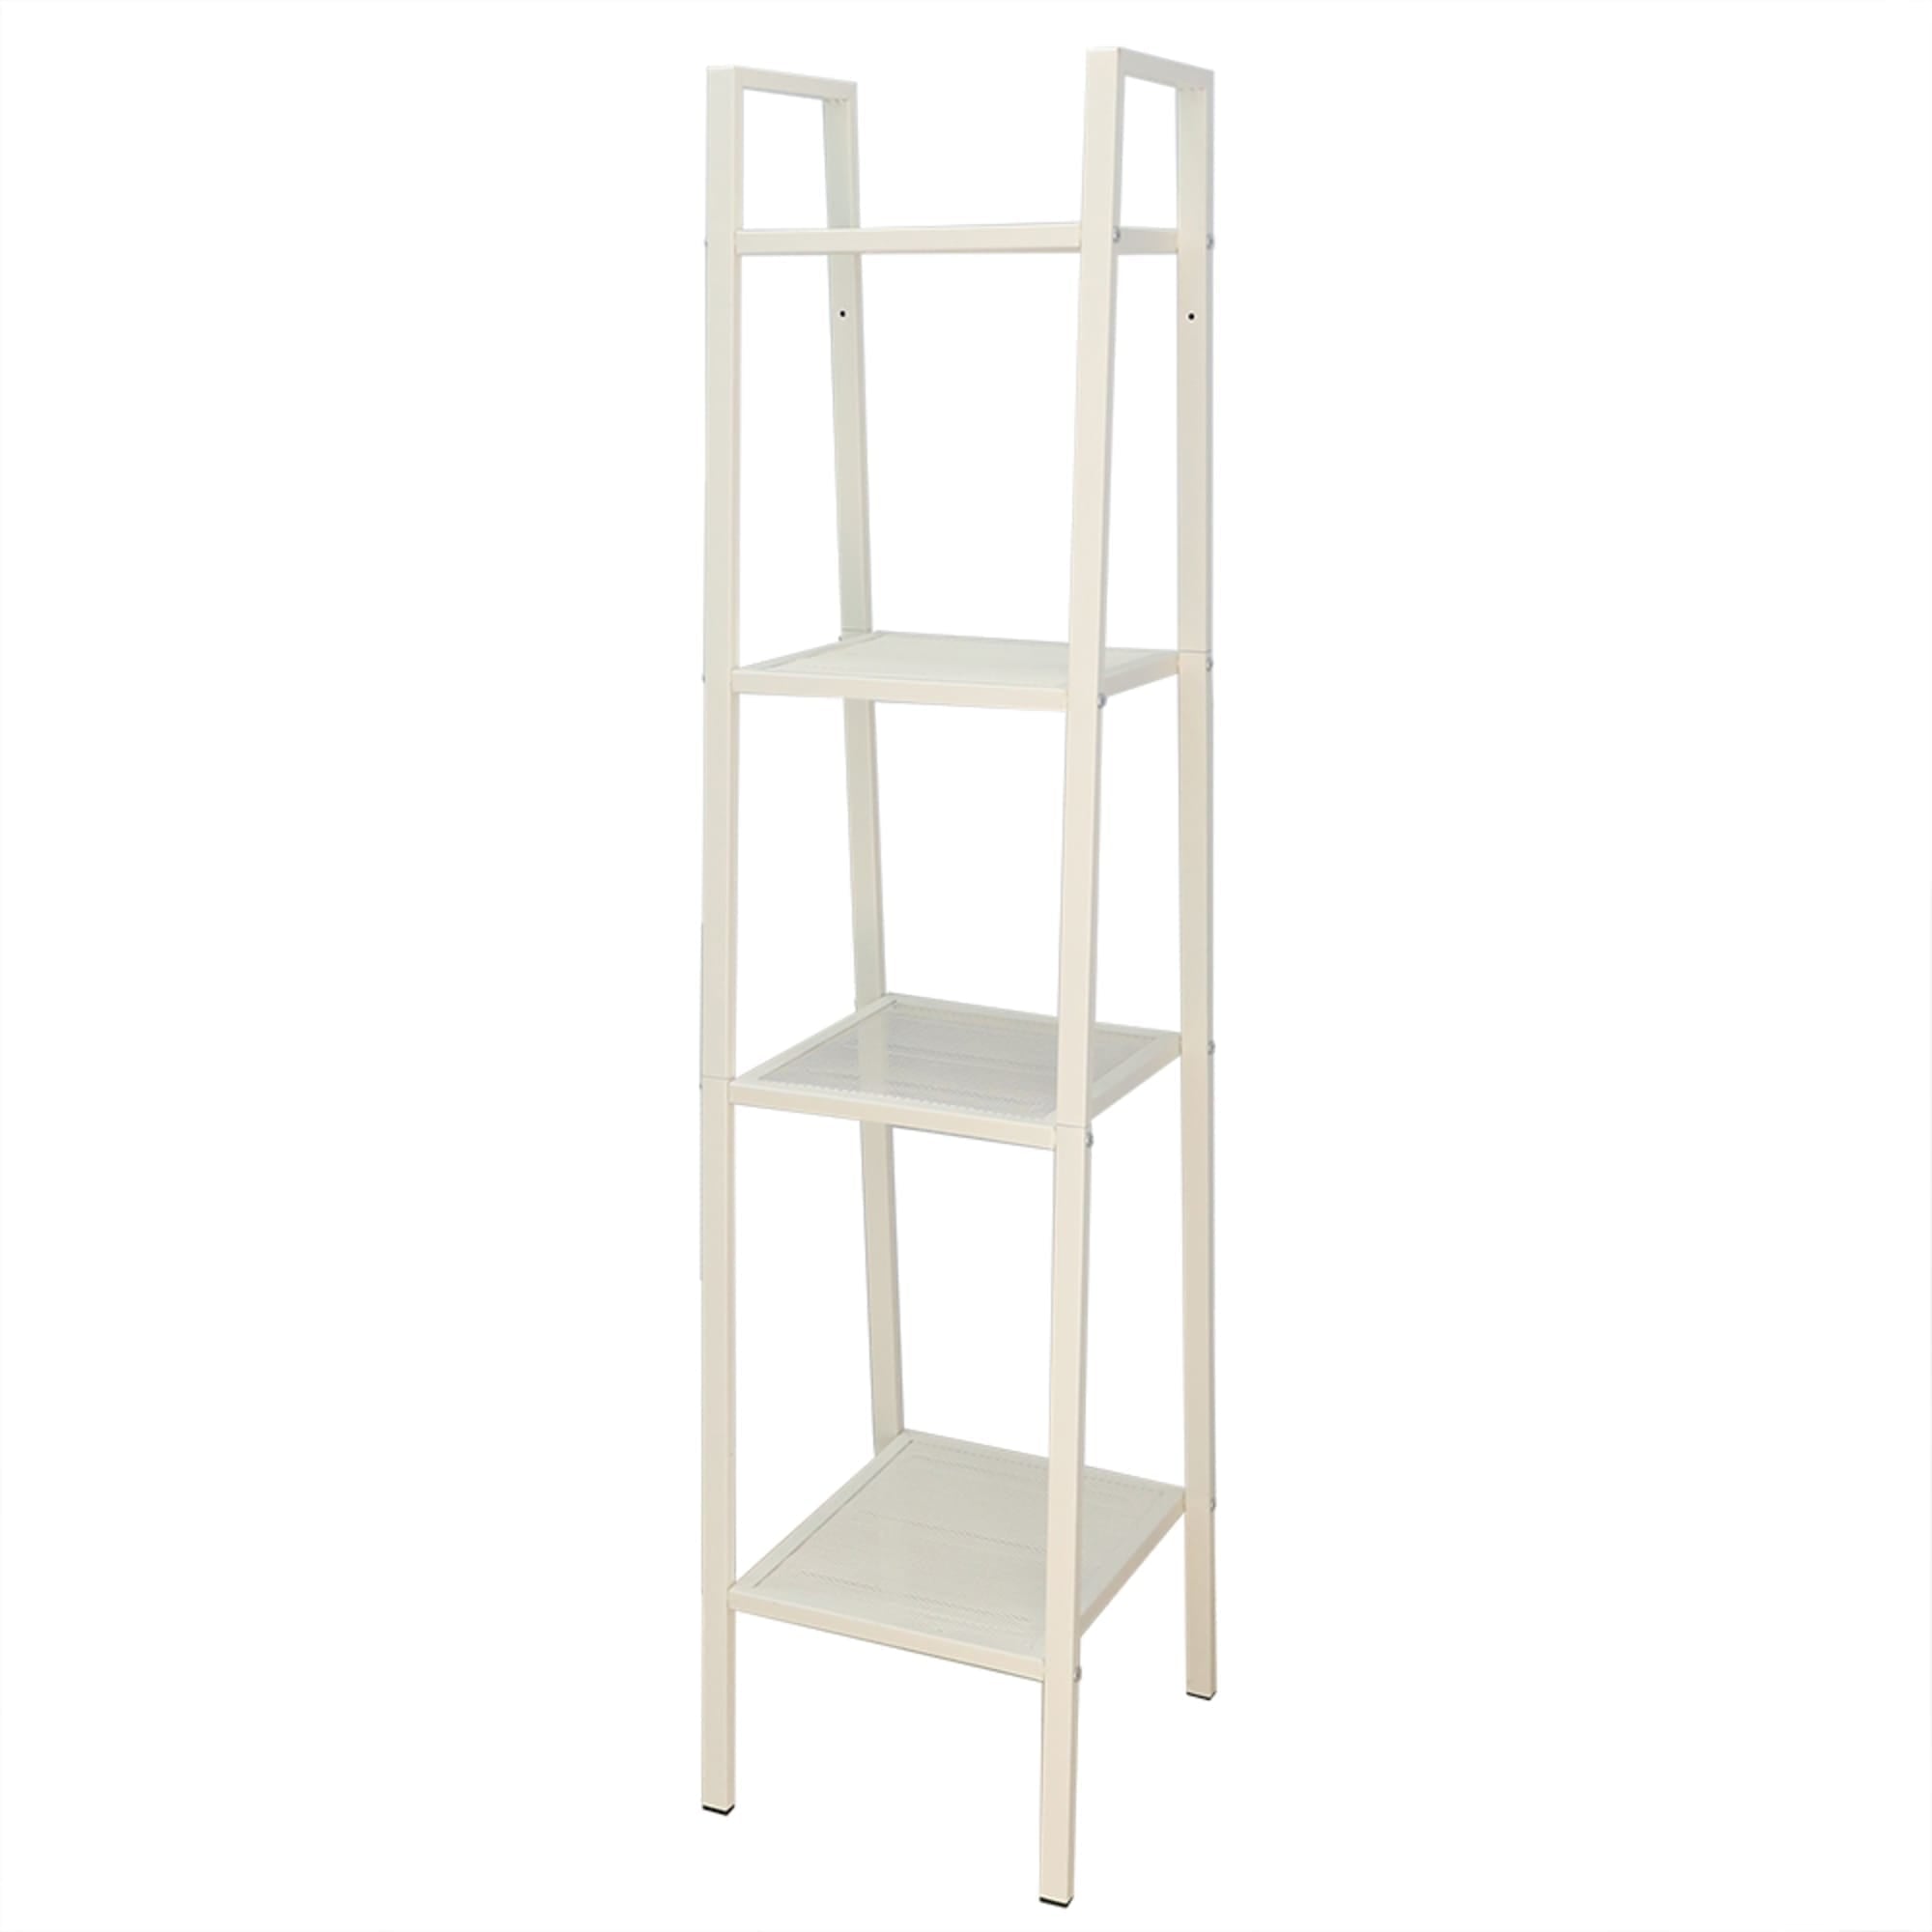 Home Basics Small 4 Tier Metal Rack, (14” x 14” x 58”), Off-White $40.00 EACH, CASE PACK OF 1